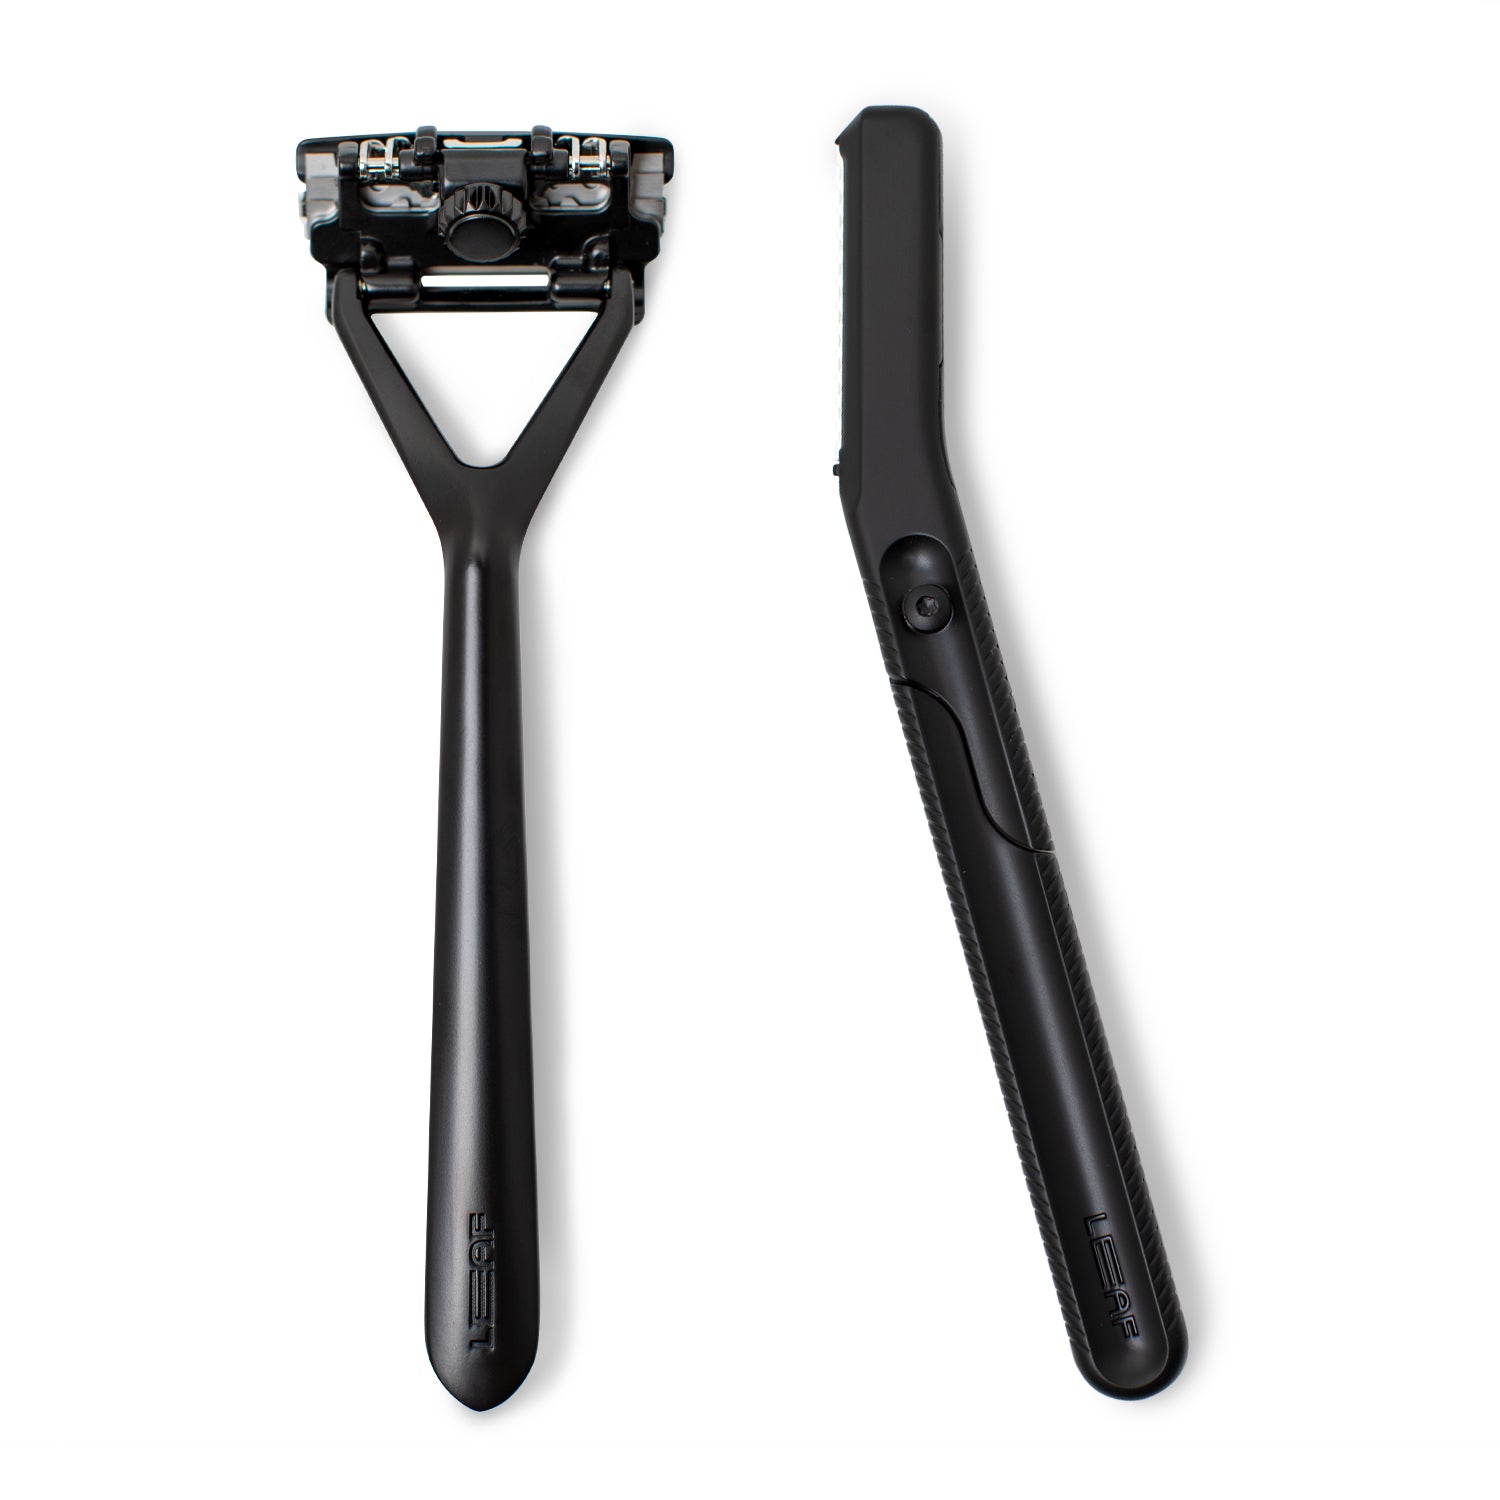 This image contains Leaf Shave brand Leaf and Dermaplaner razors on a white background, in the finish called Black